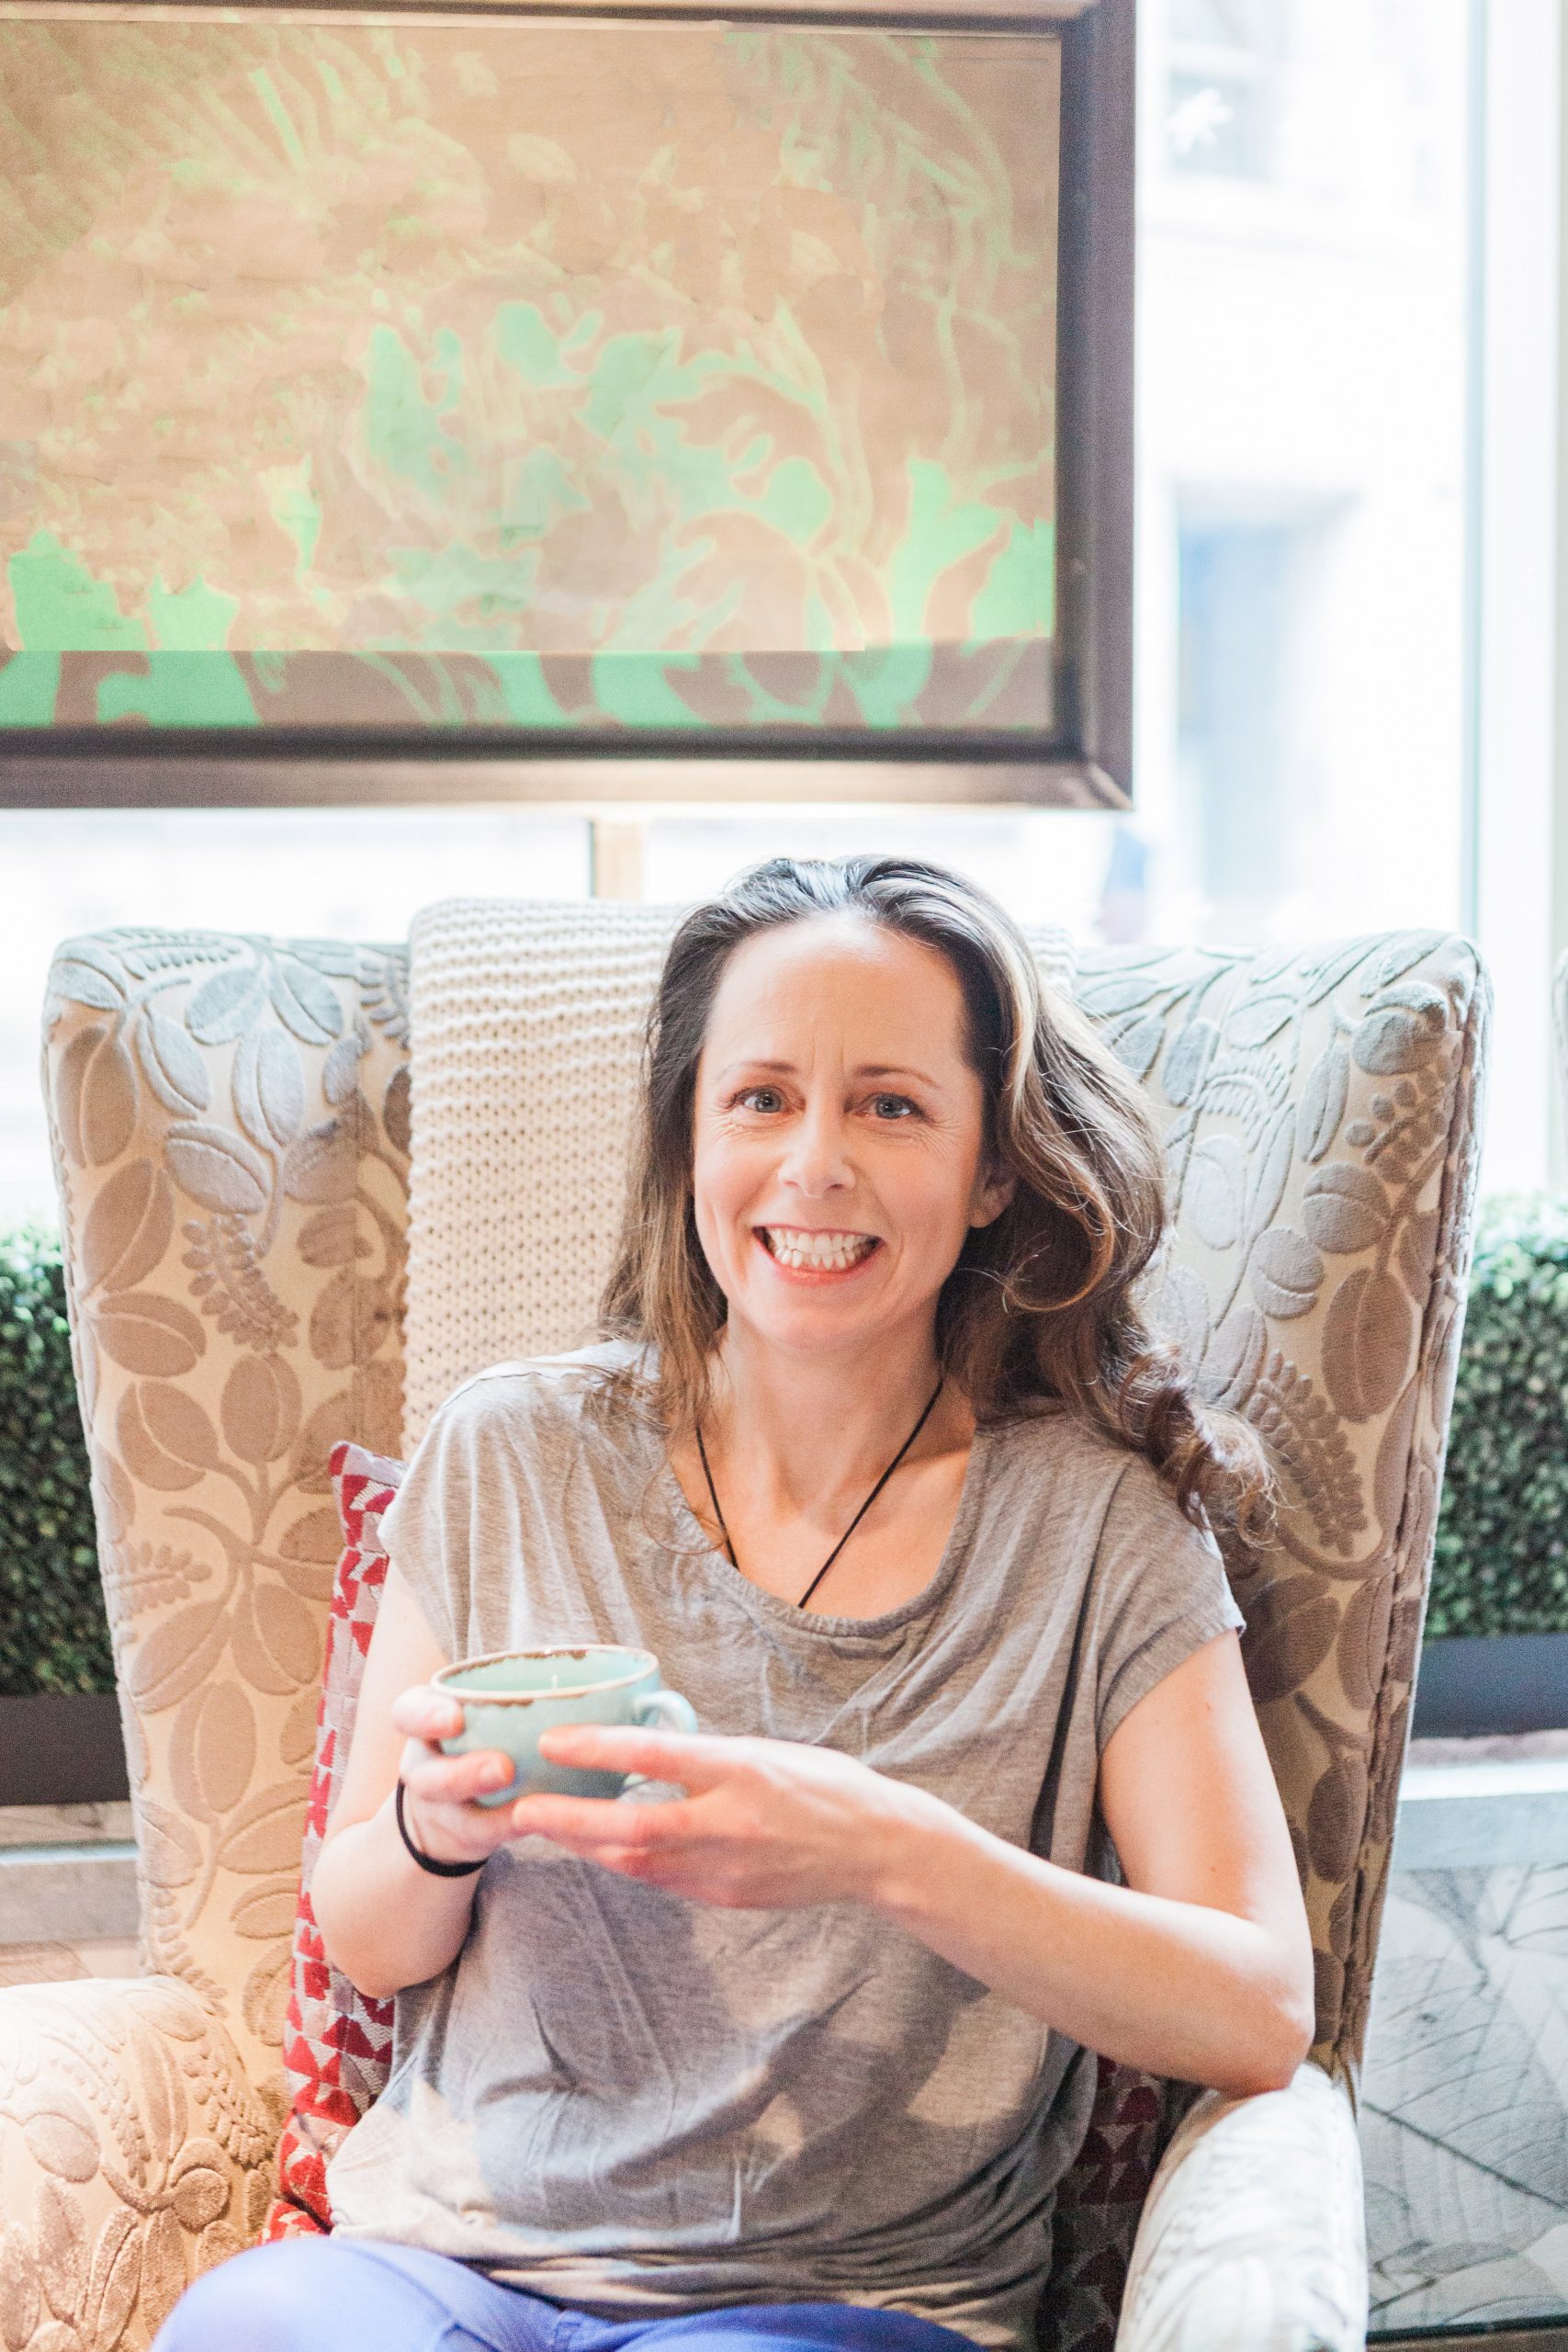 Health Series - Louise Westra, Naturopath, On Energy And Focus